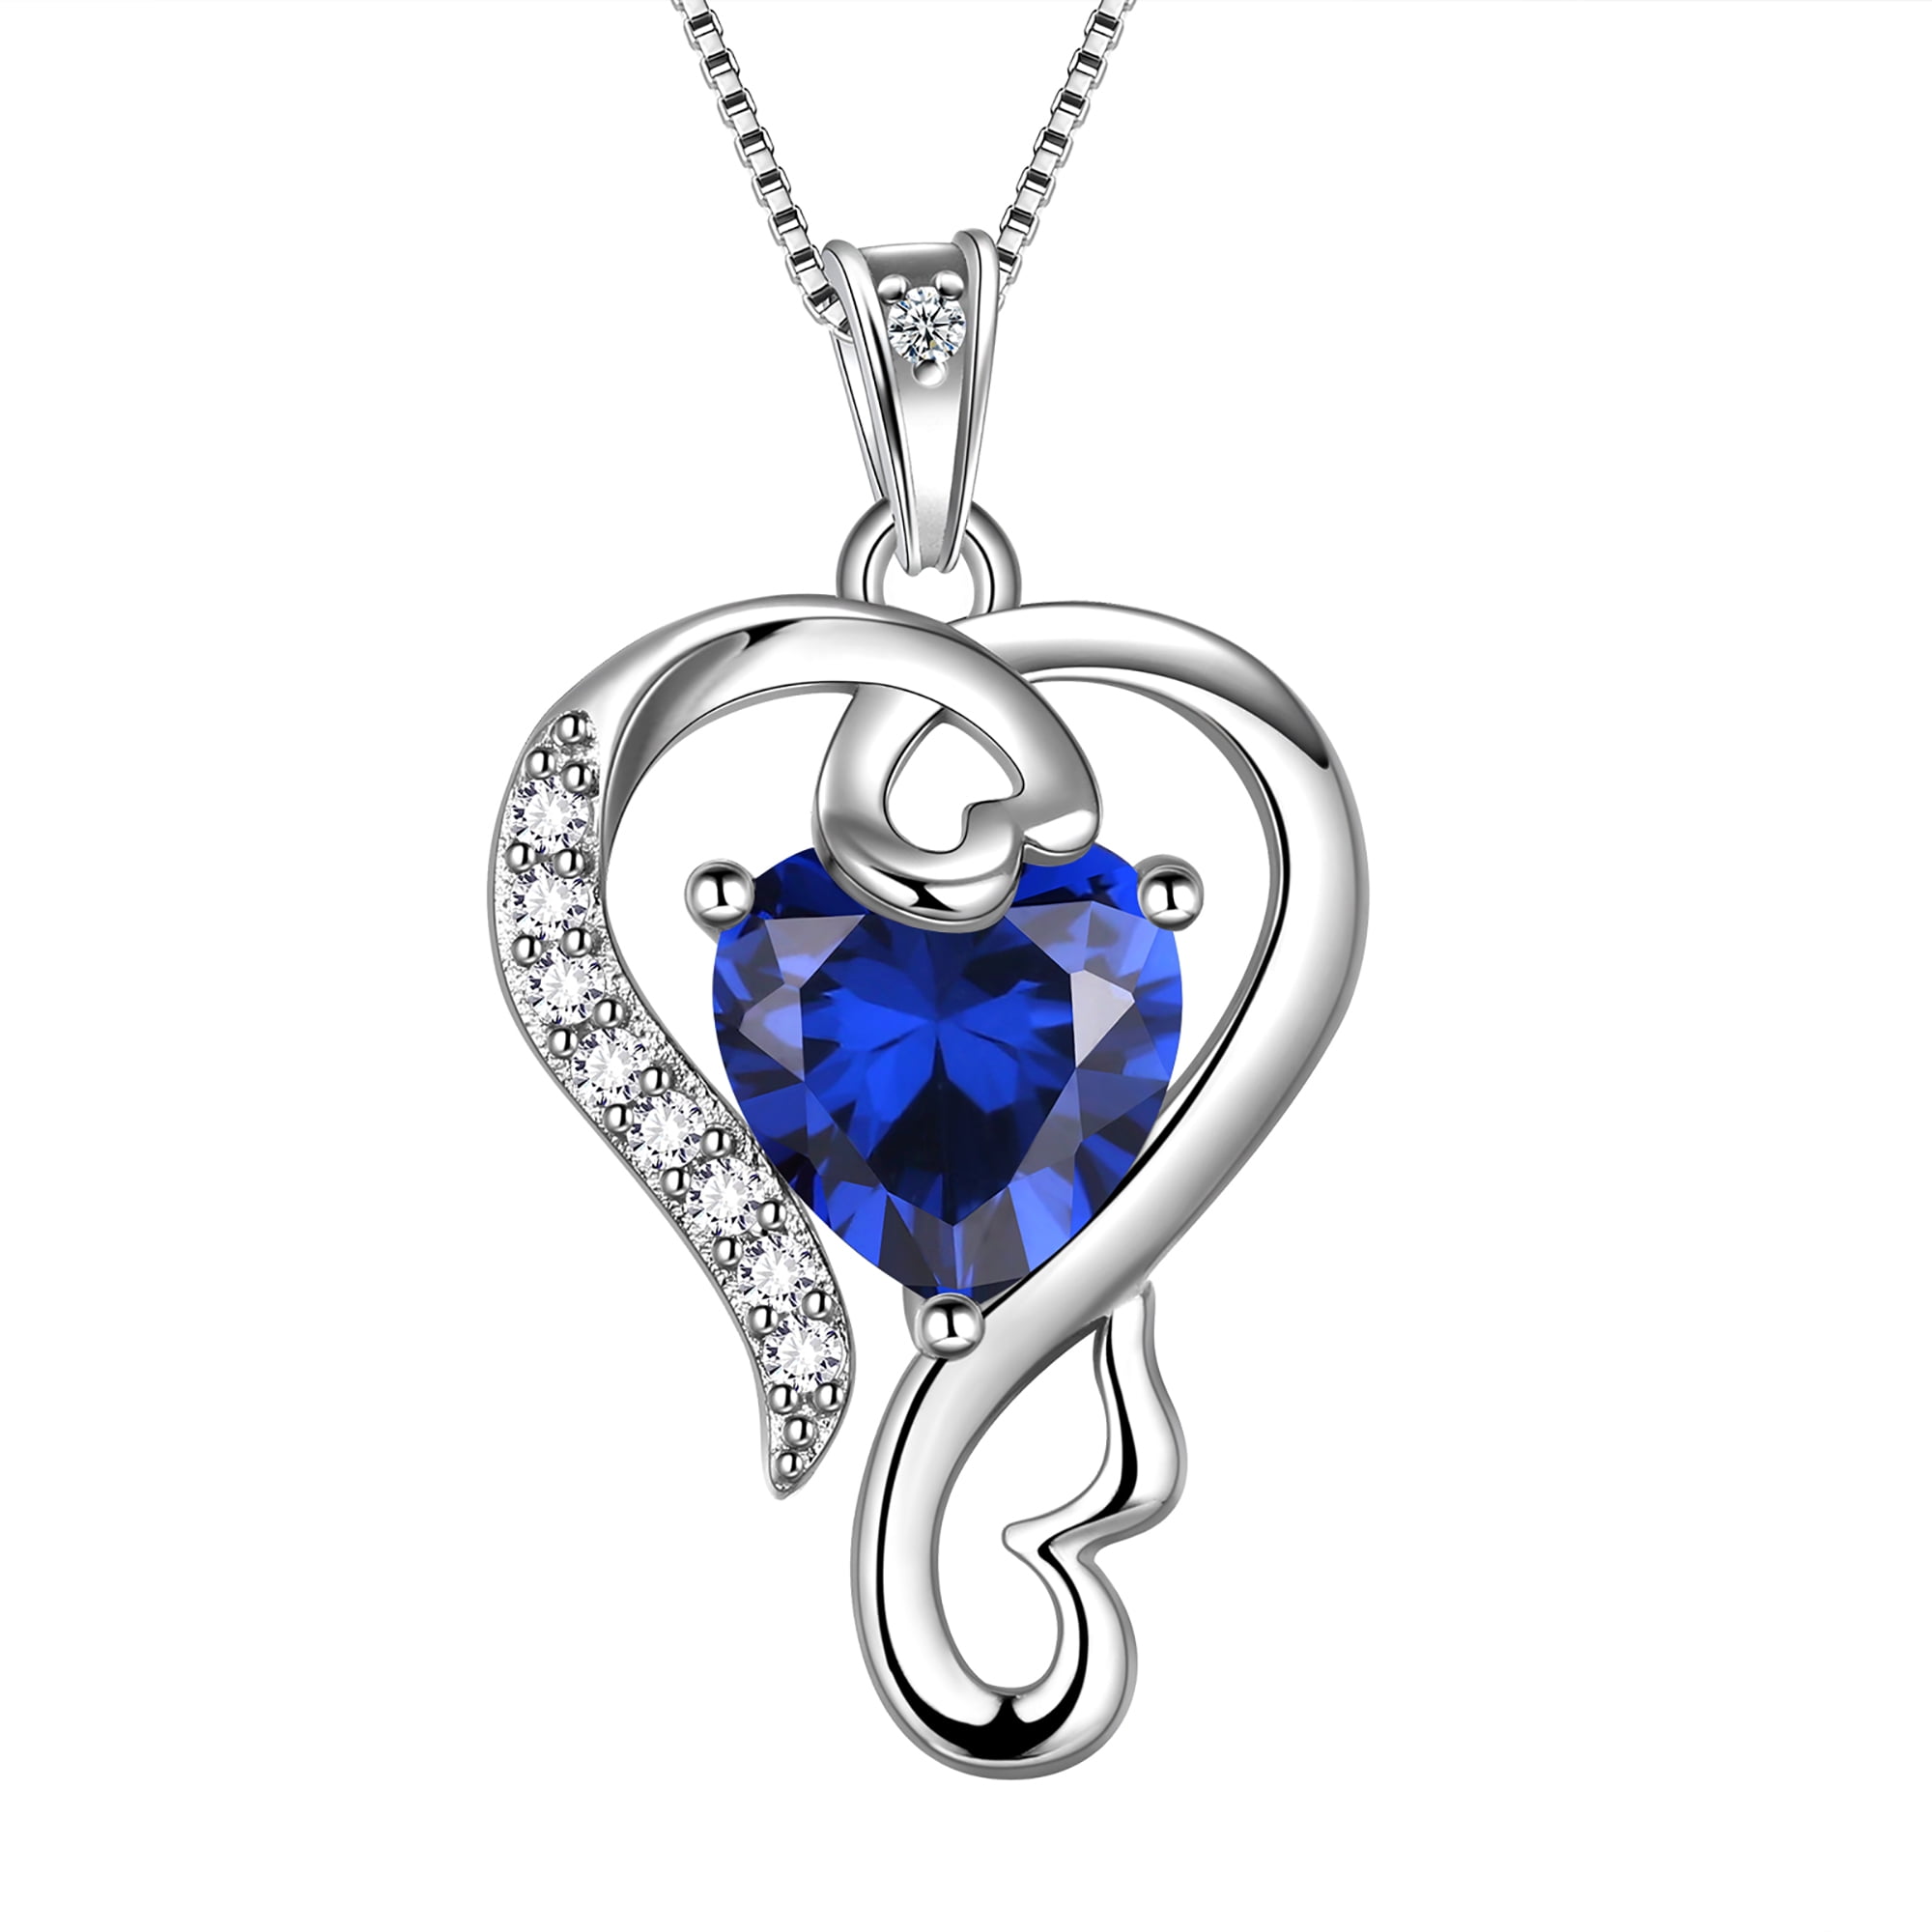 Beautlace 925 Sterling Silver Love Heart Necklace Sepetember